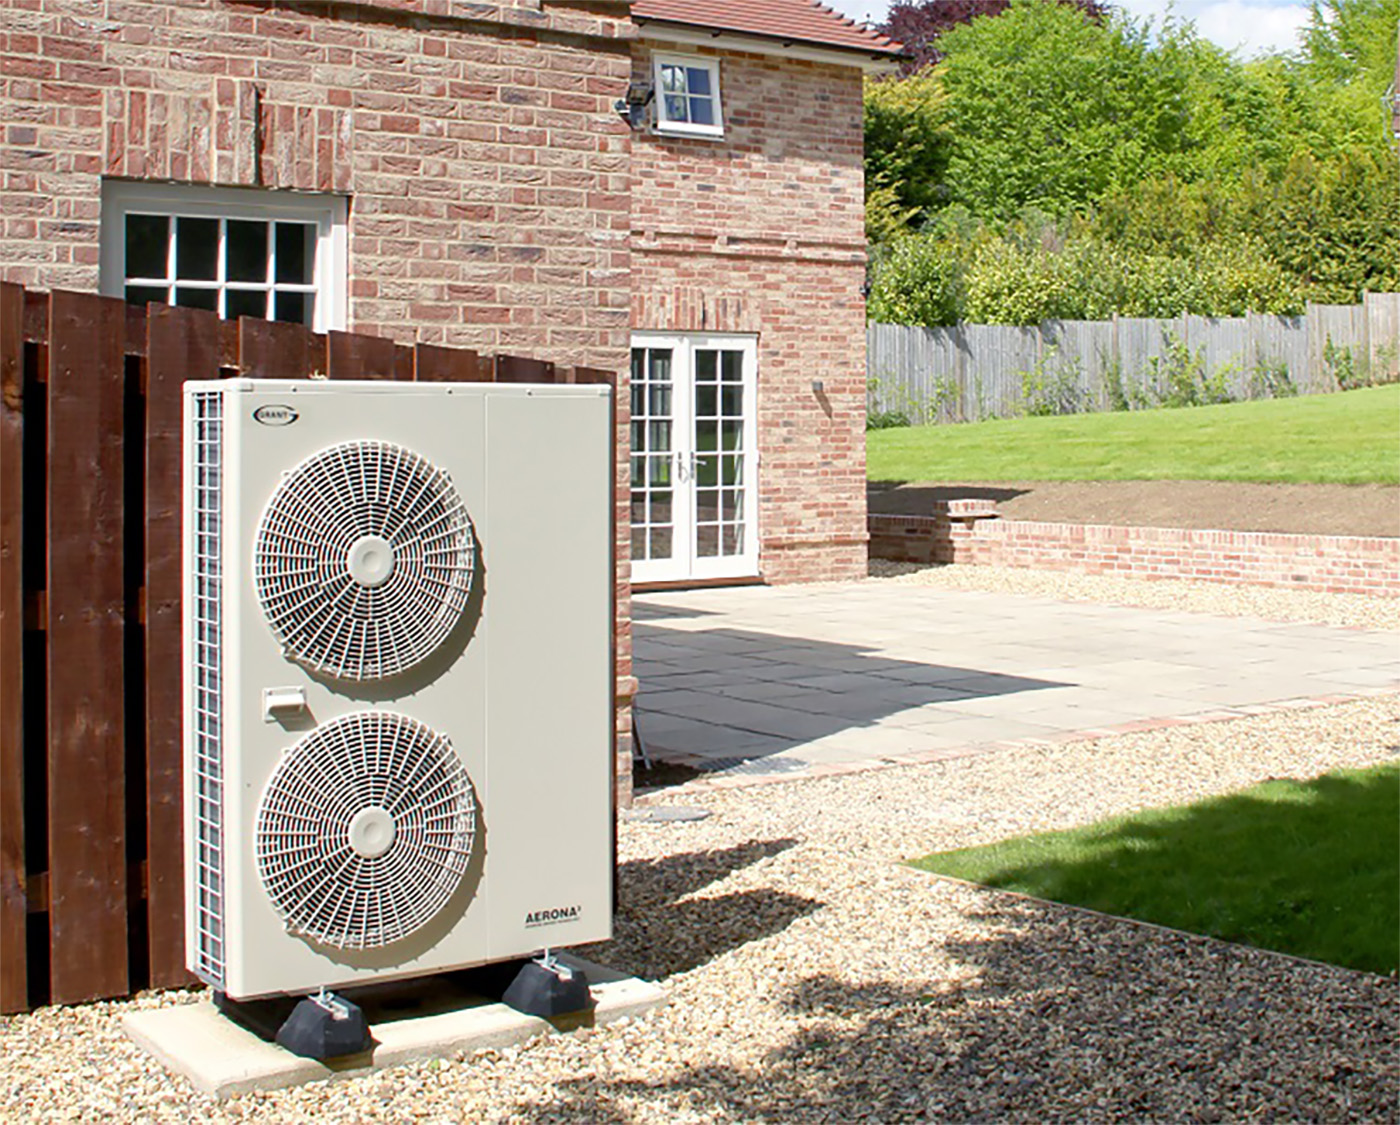 Grant’s Aerona3 13kW and 17kW air source heat pumps both hold Quiet Mark certification. Here, the external unit has been installed behind fencing for even greater acoustic protection